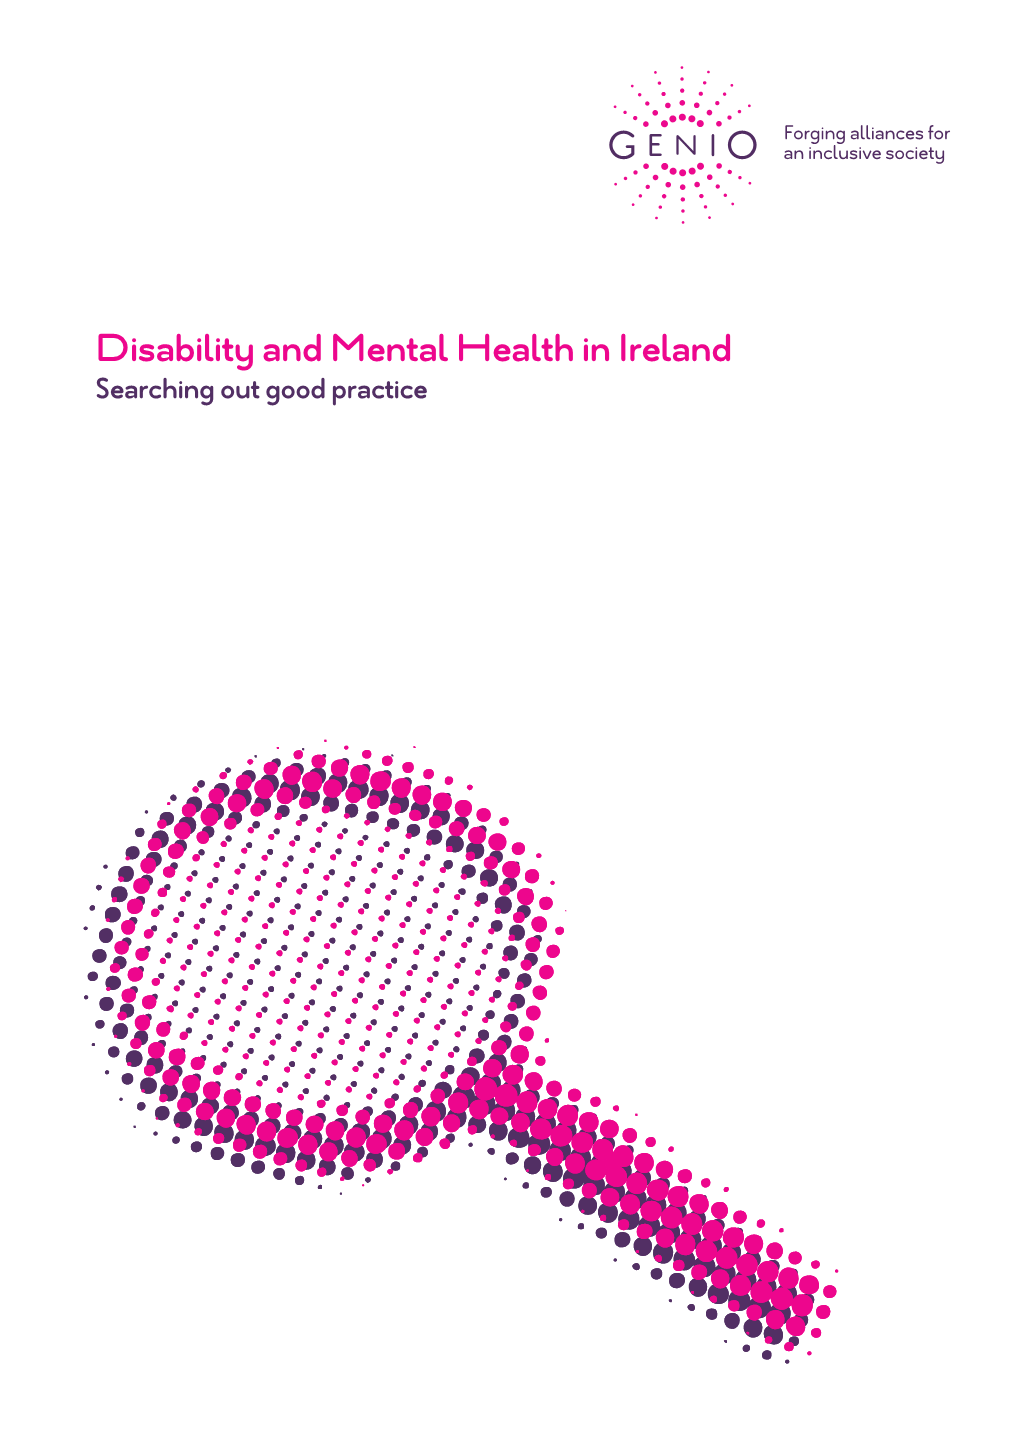 Disability and Mental Health in Ireland Searching out Good Practice